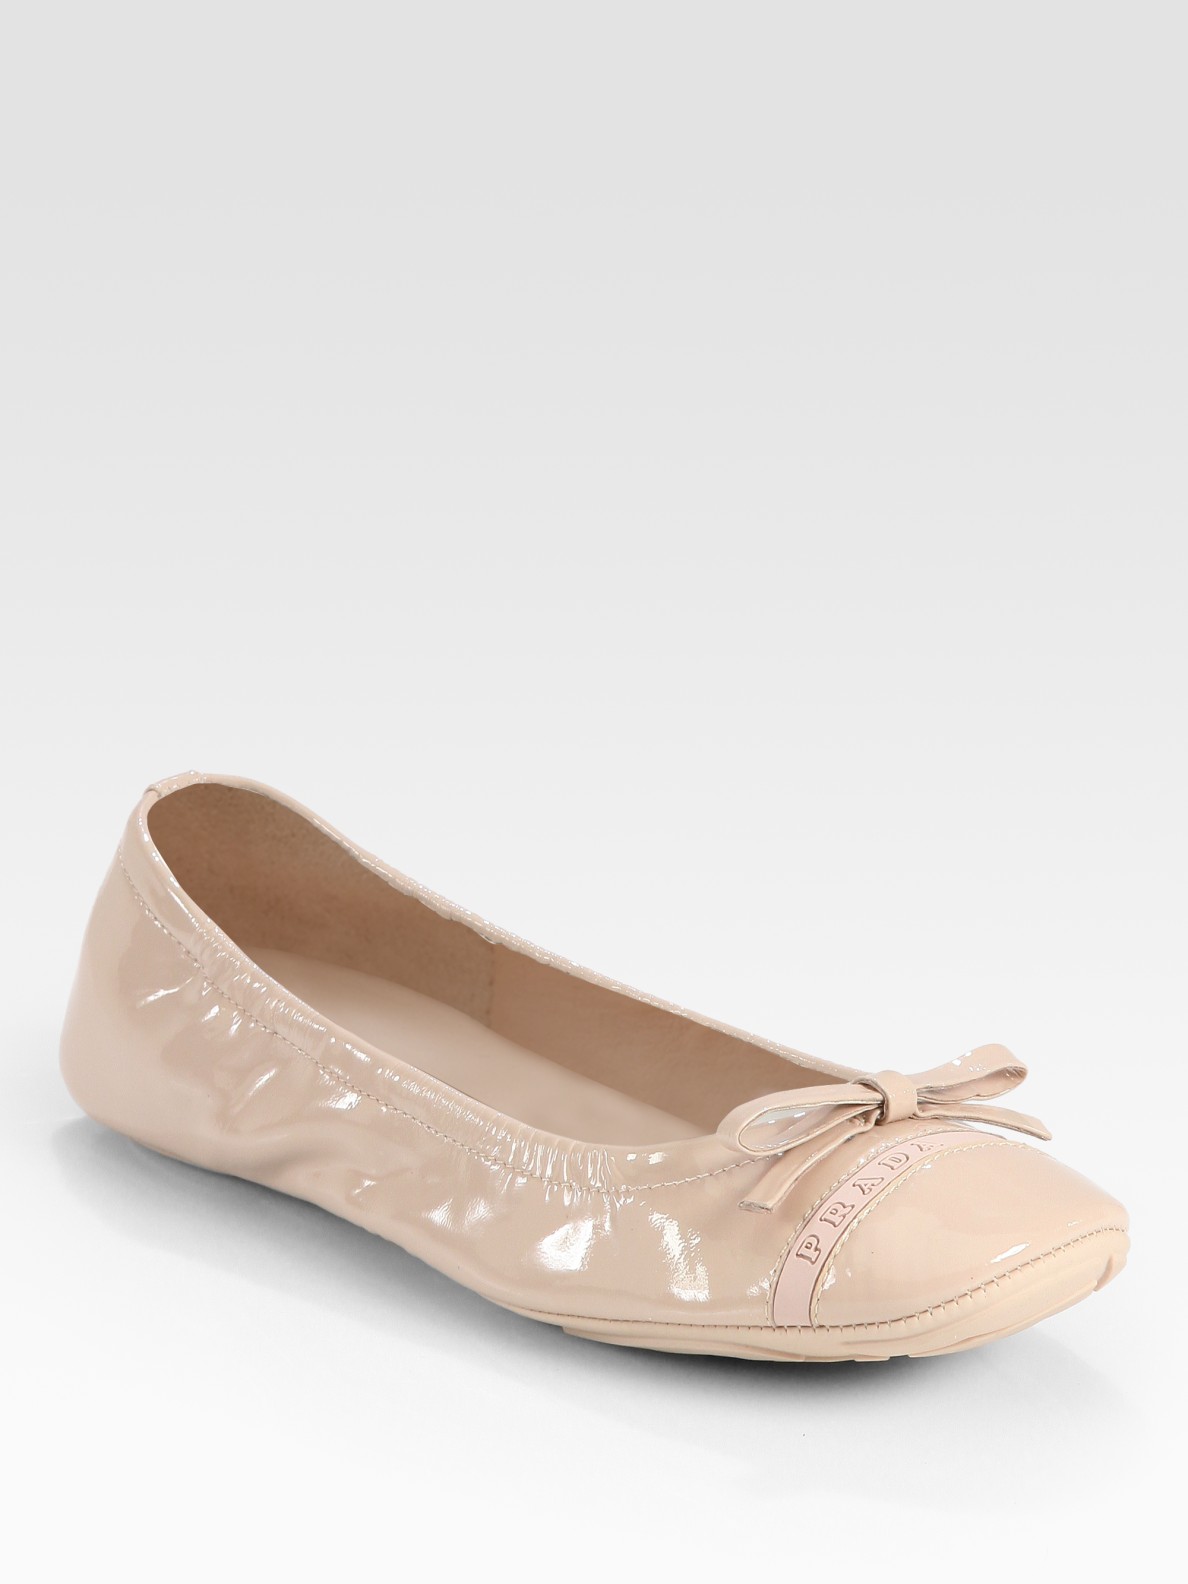 Lyst - Prada Patent Leather Bow Ballet Flats in Natural